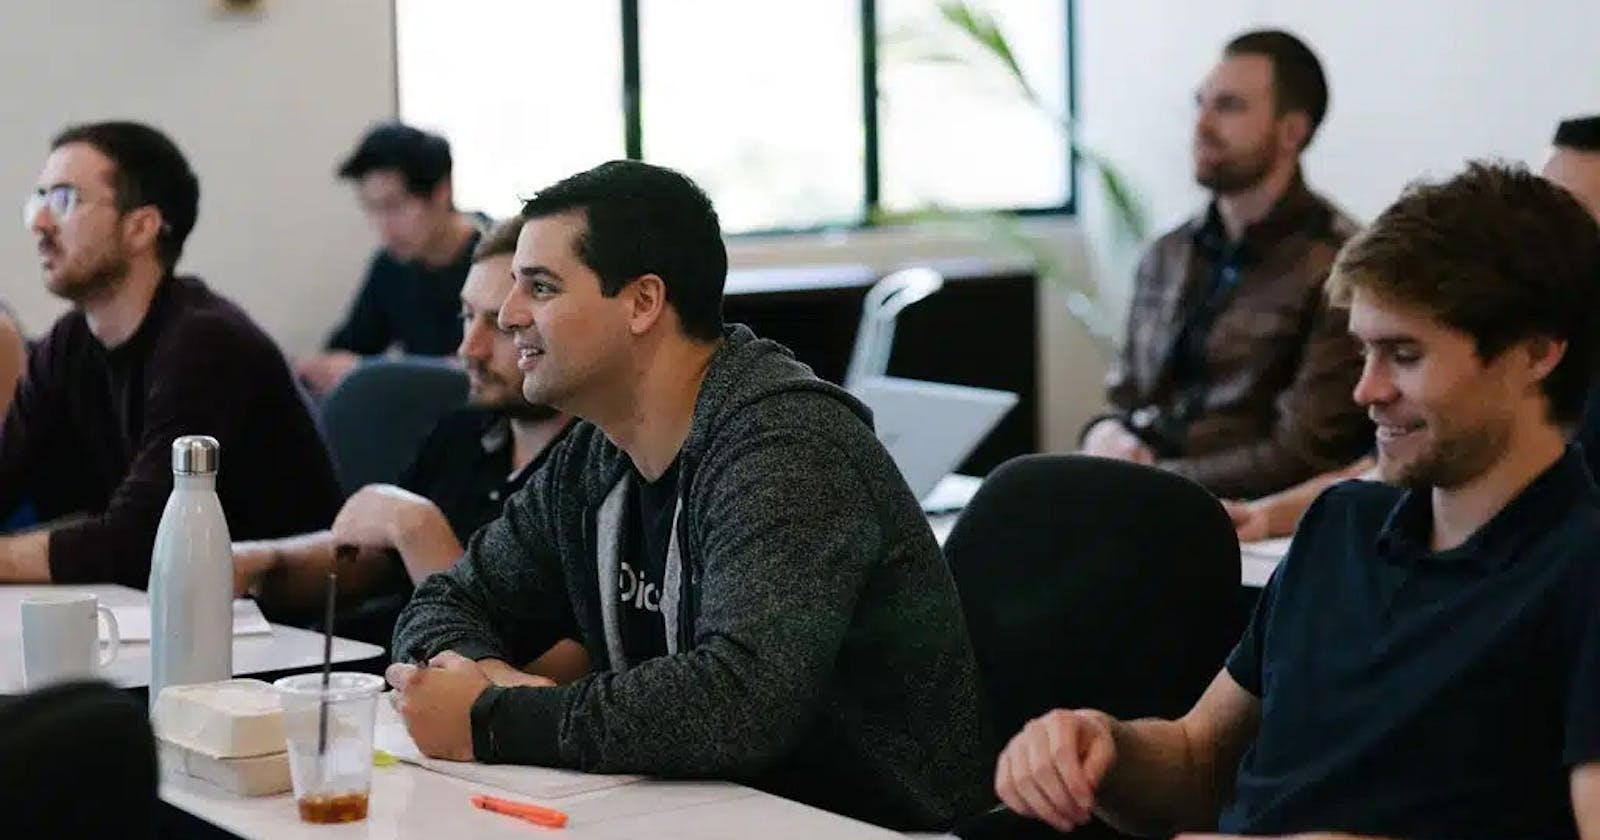 What kind of jobs do new coding bootcamp grads get?